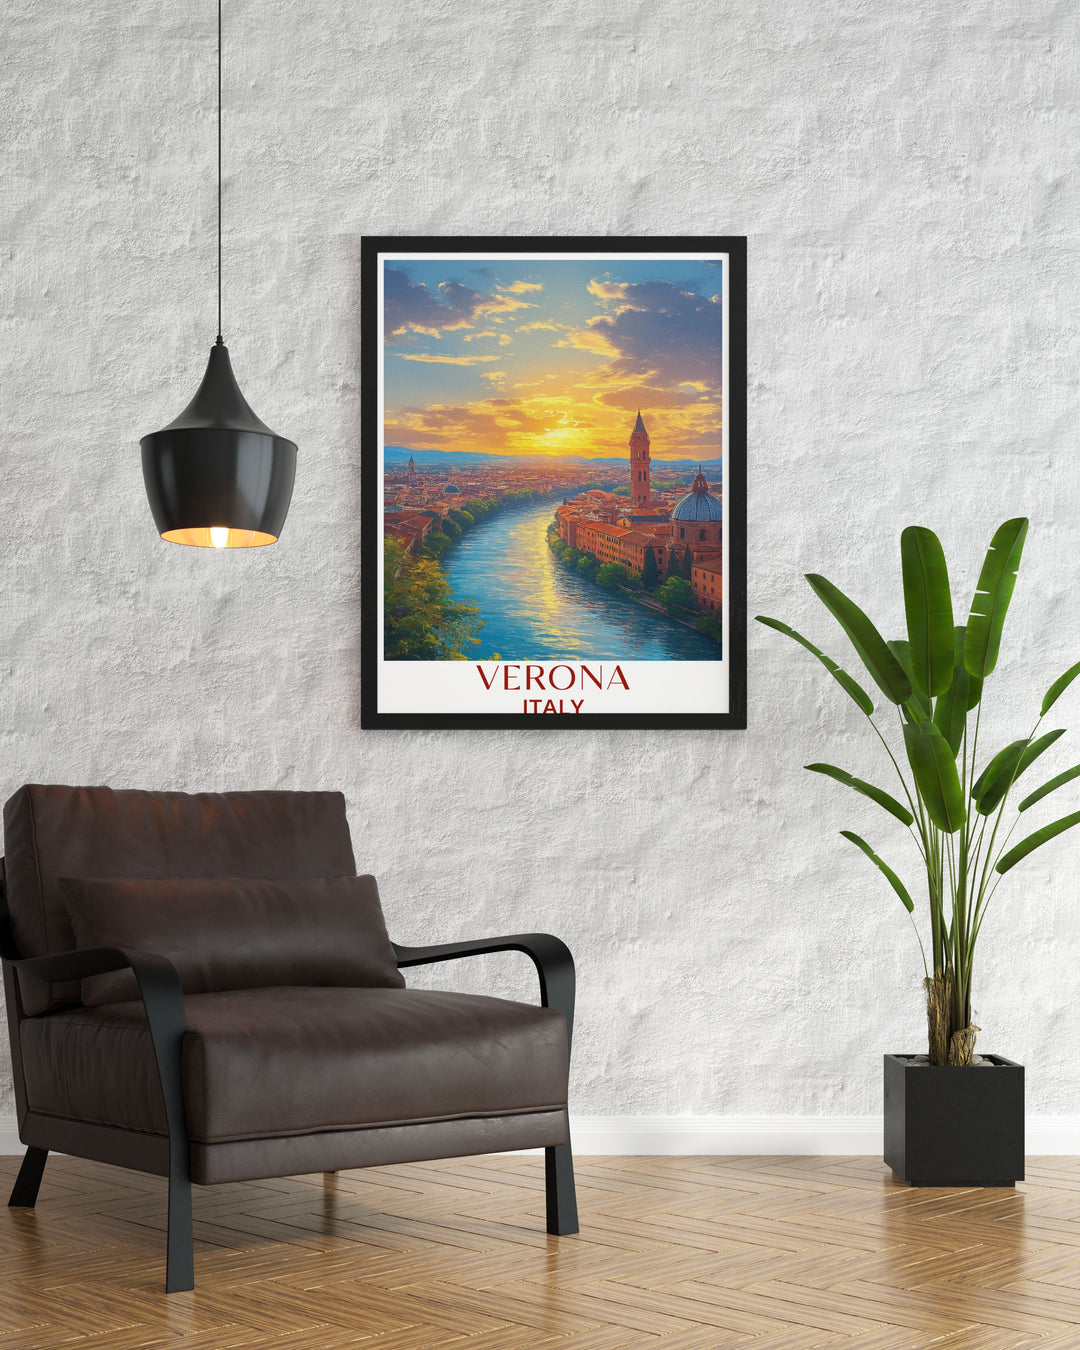 This detailed illustration of Verona brings its architectural splendor and scenic vistas into your home. Ideal for travel and history enthusiasts, it features the stunning views from Castel San Pietro and the citys enchanting streets.